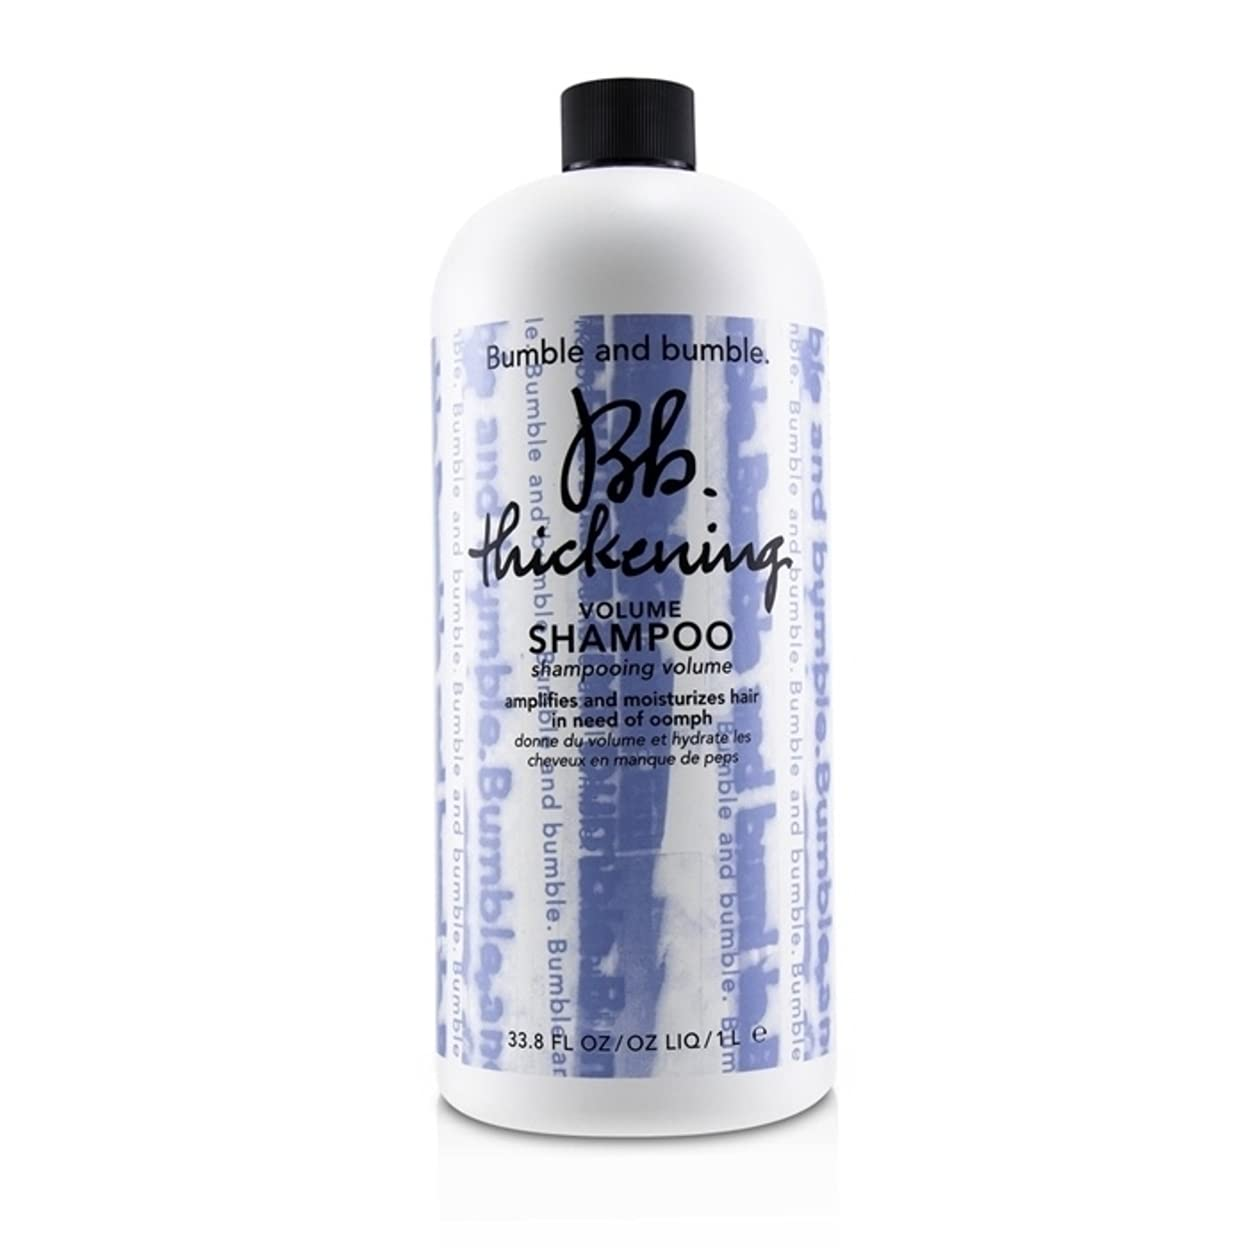 Bumble & Bumble Thickening Volume Shampoo support hair growth